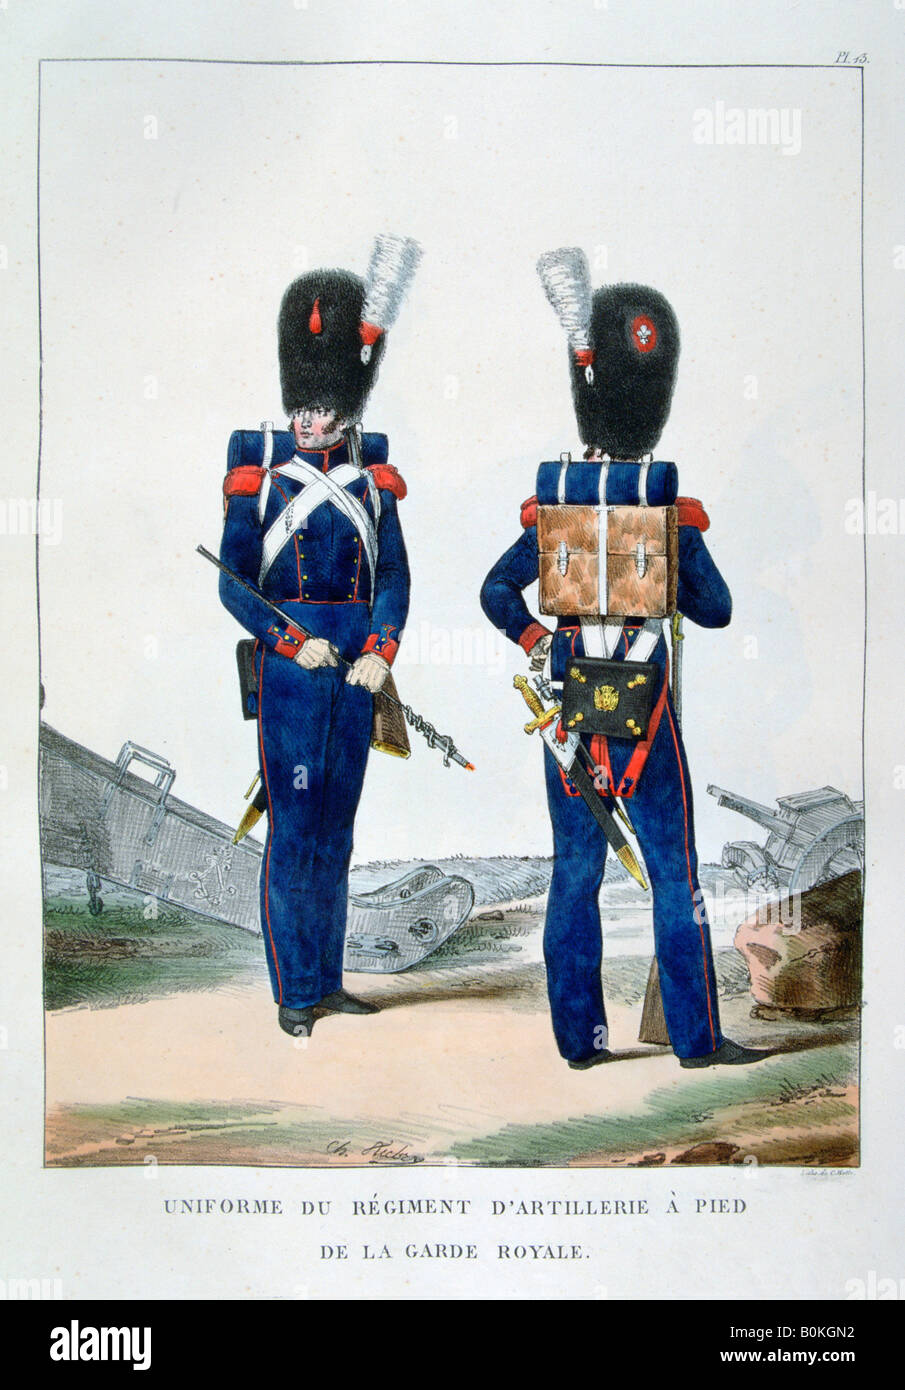 Uniform of a regiment of foot artillery of the royal guard, France, 1823.  Artist: Charles Etienne Pierre Motte Stock Photo